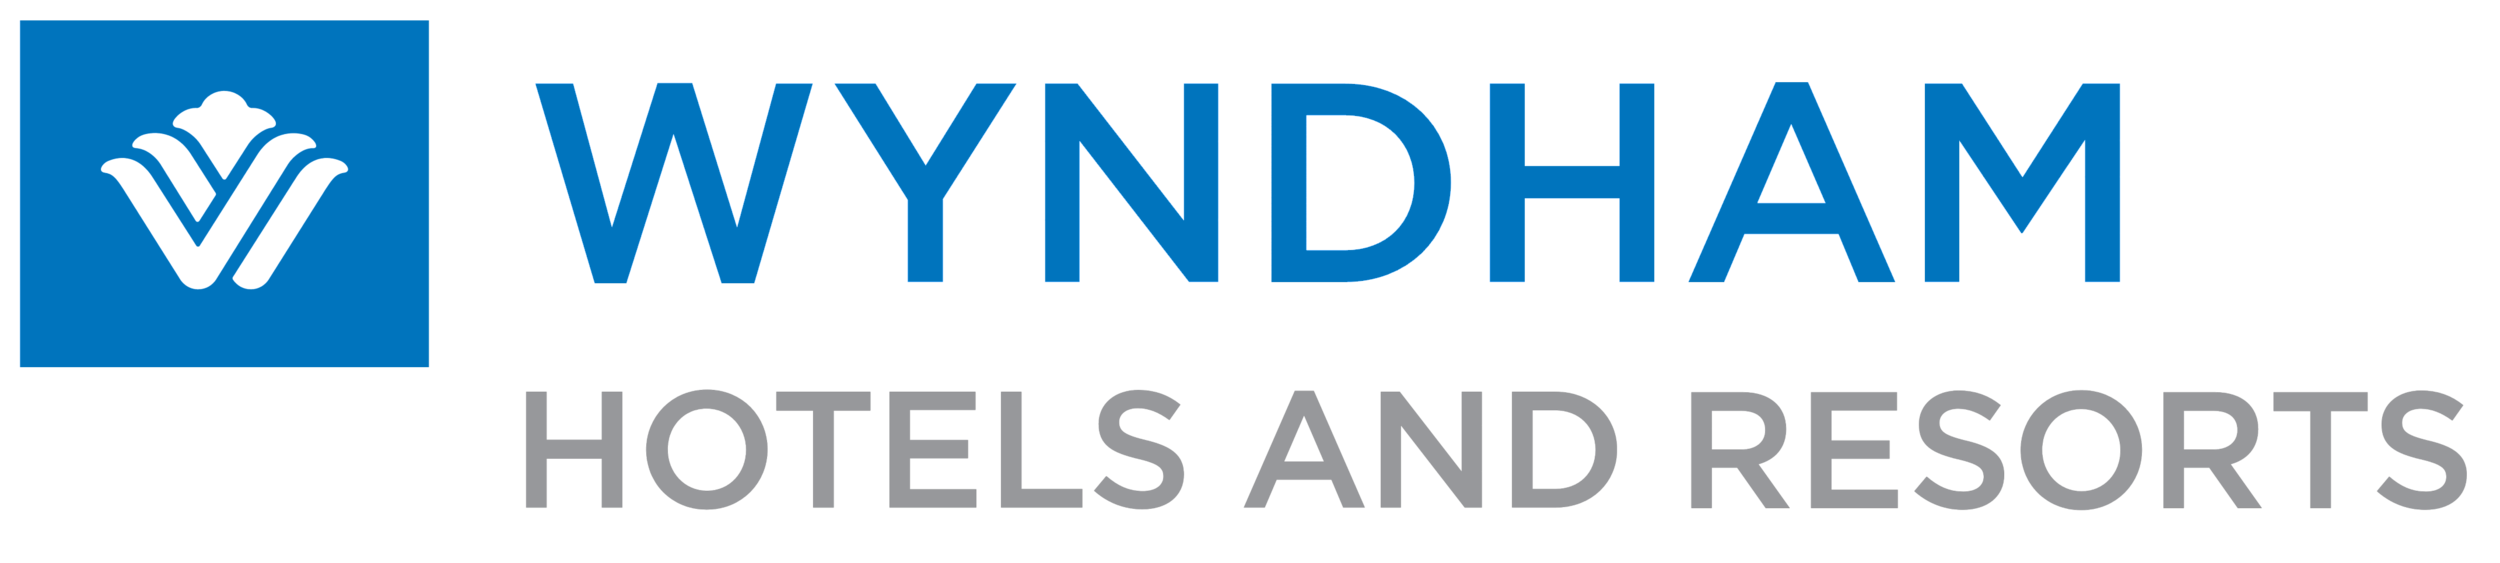 Wyndham_Hotels_and_Resorts_logo.png